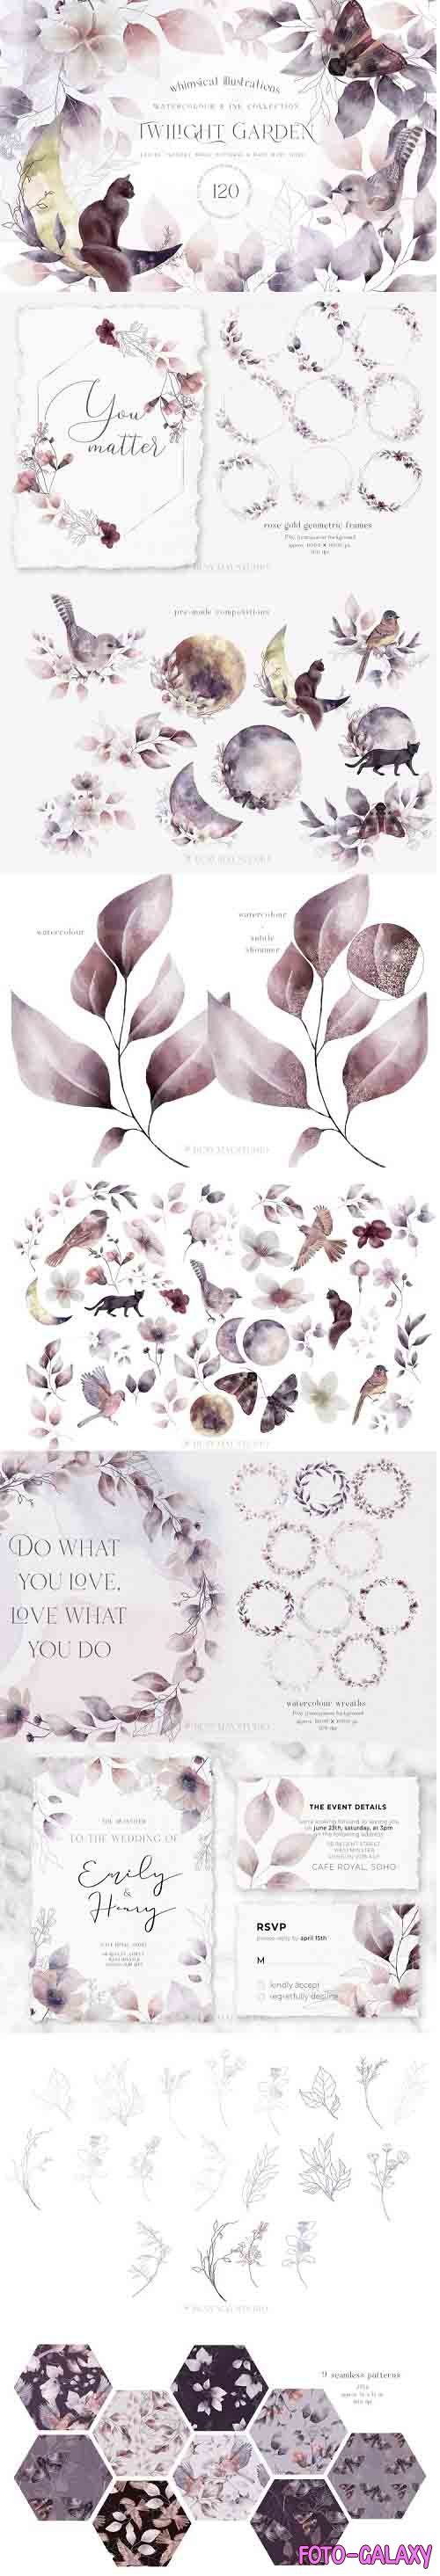 Whimsical Leaves Flowers Birds Moons Watercolor Patterns - 1284729 - Twilight Garden